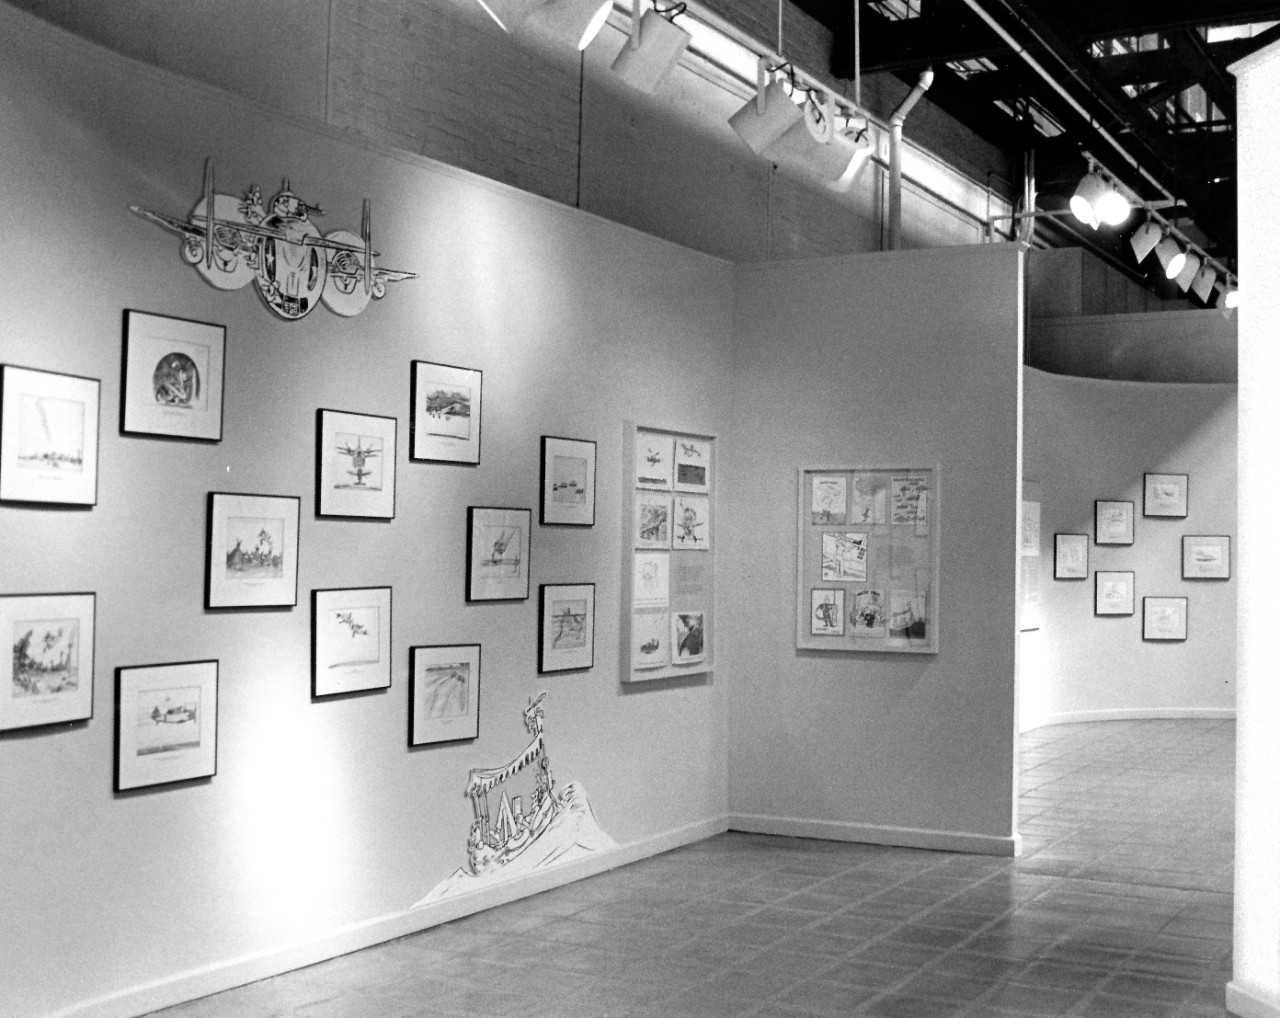 NMUSN-750 Robert Osborn Art Exhibit, 1991. Exhibit focused on the artist’s career with images of Dilbert and Grampaw Pettibone amongst others. National Museum of the U.S. Navy Photograph Collection.